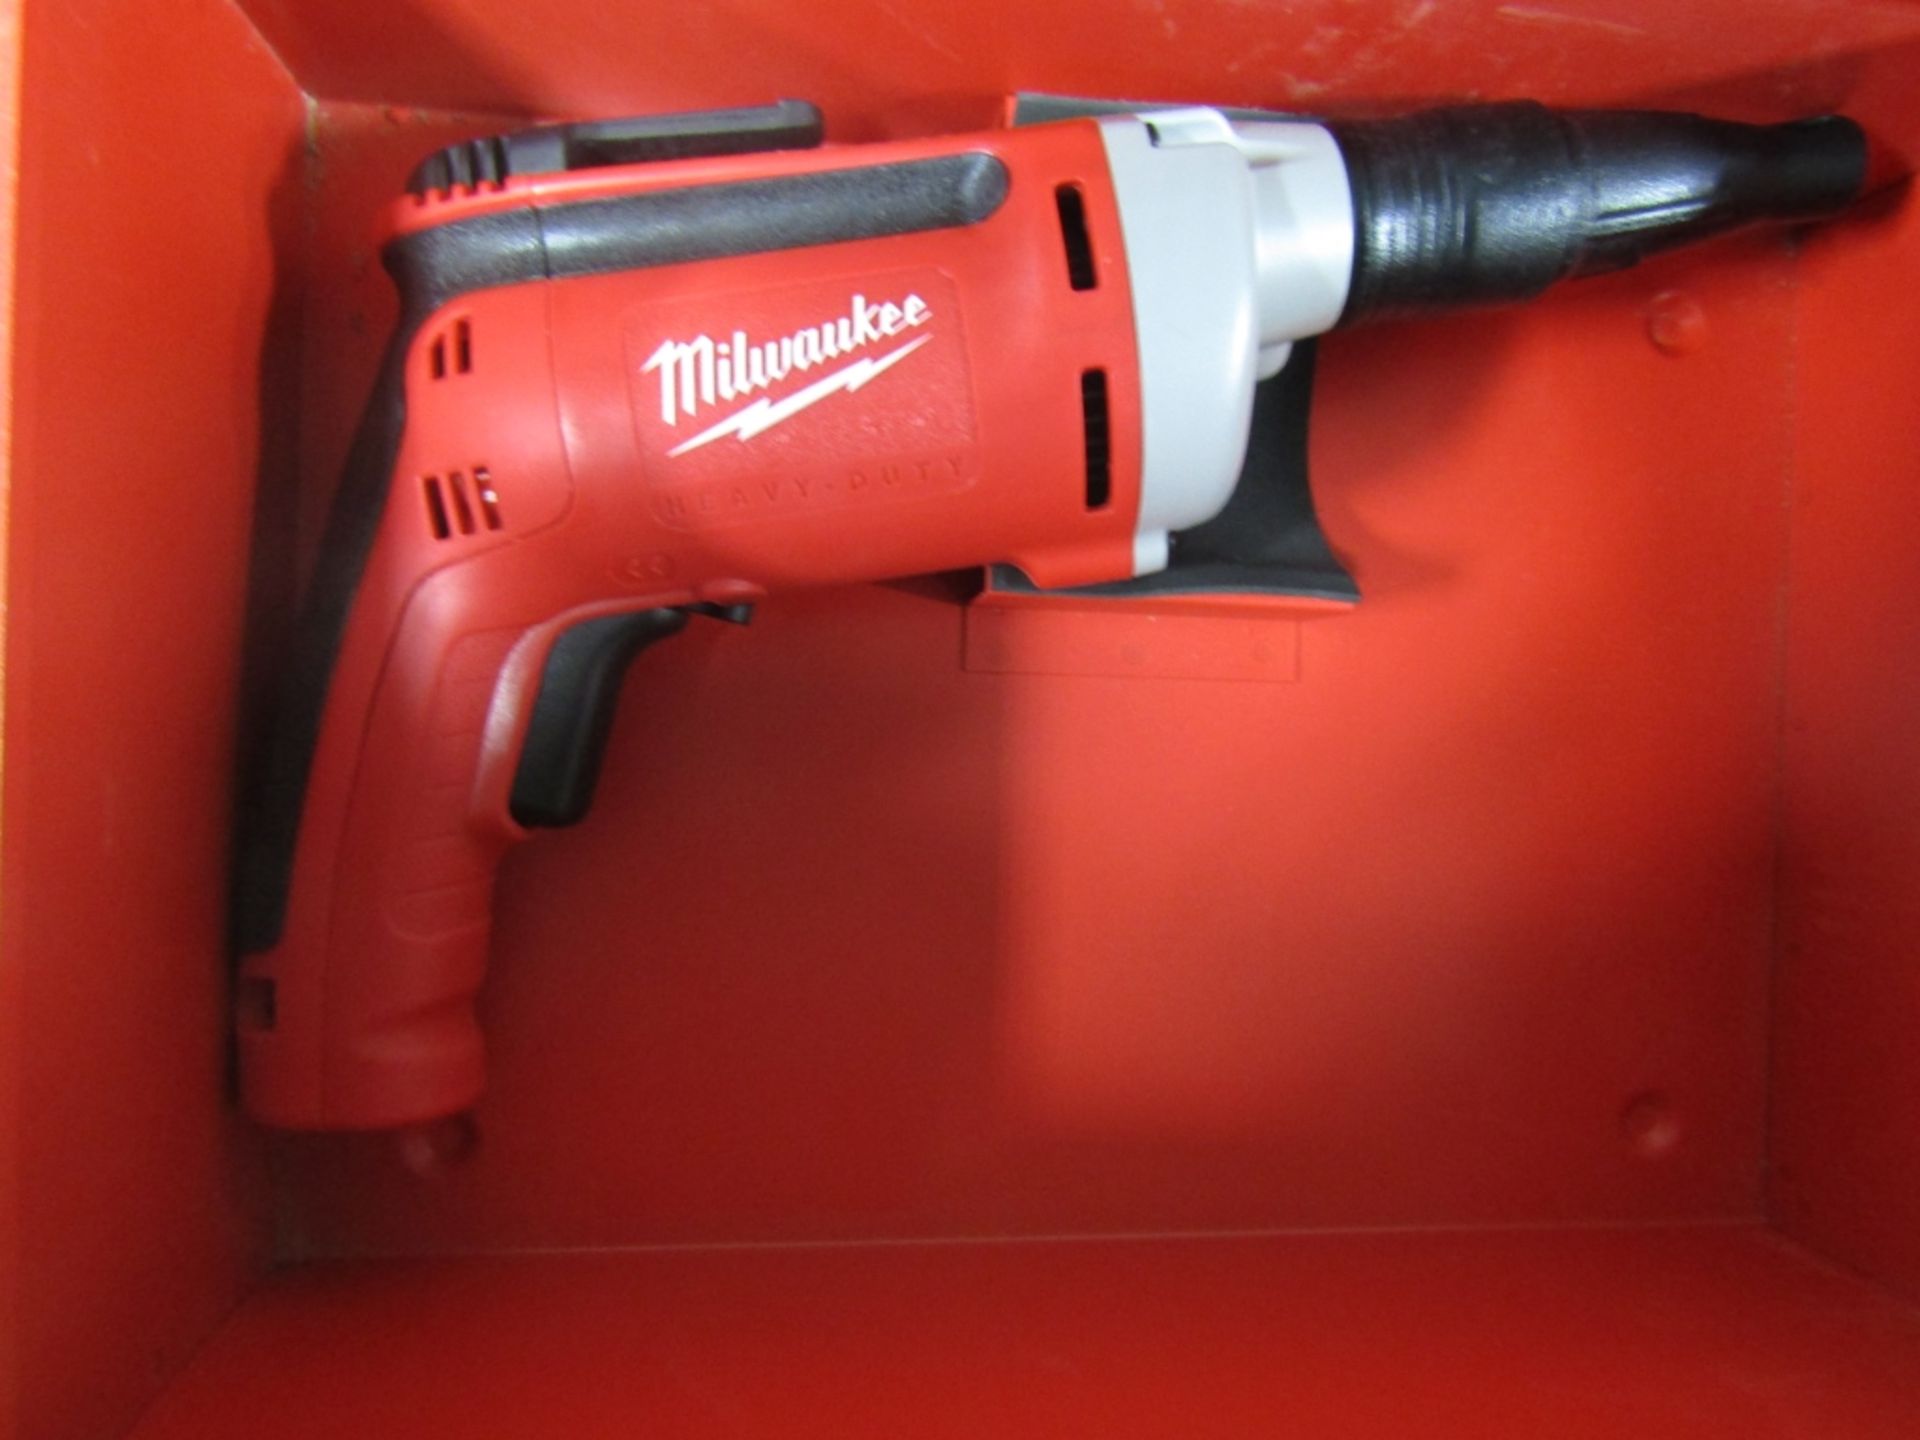 NEW Milwaukee Heavy- Duty Electric Screwdriver, Located in Mt. Pleasant, IA